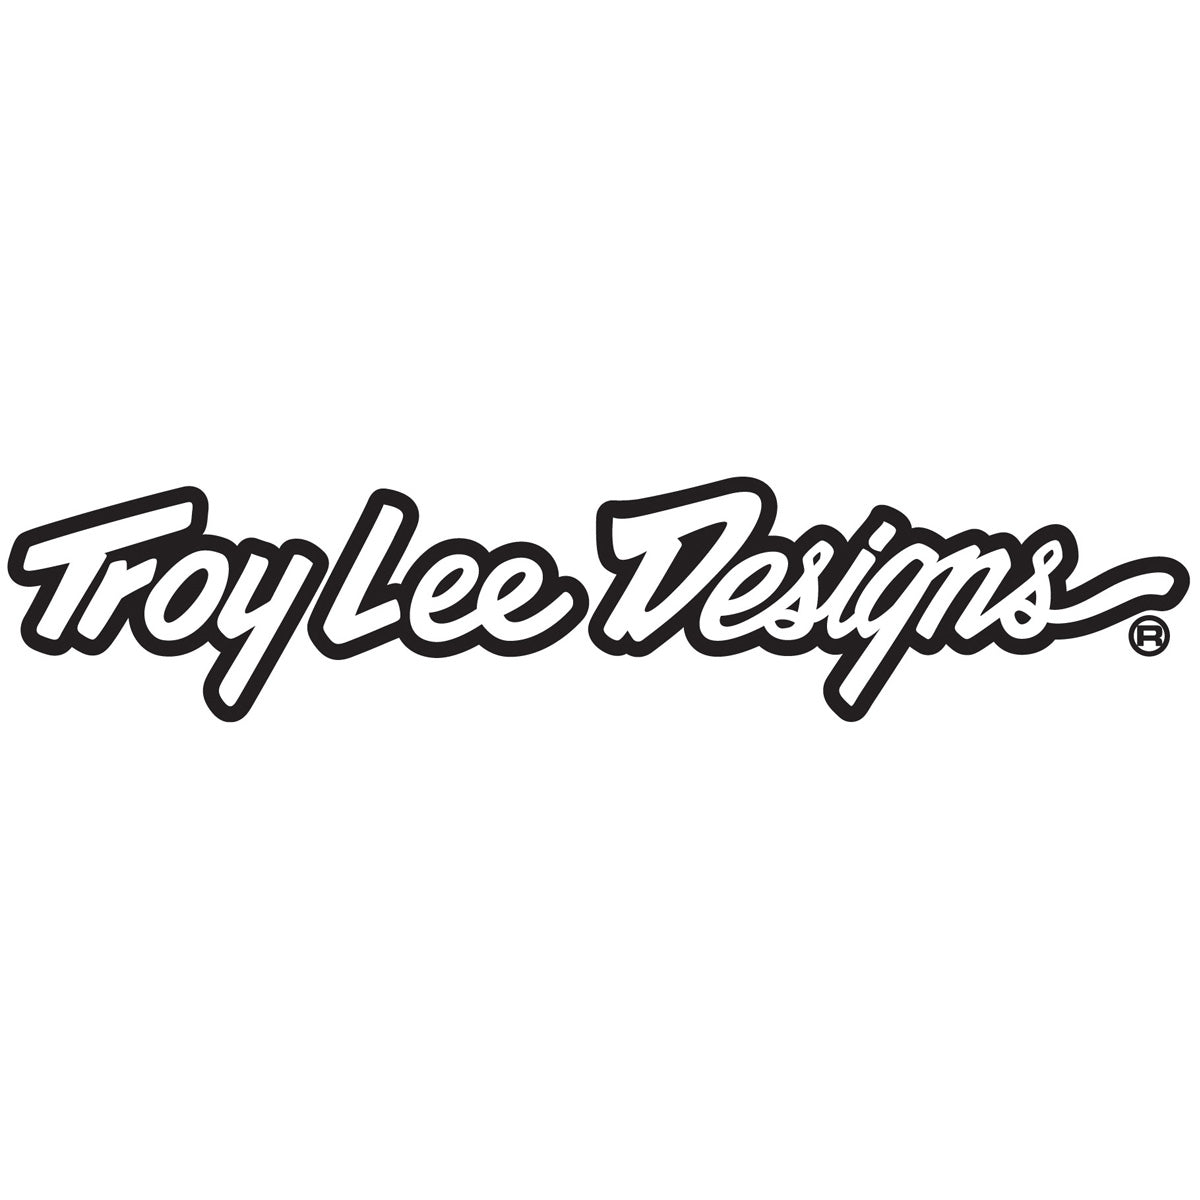 troy lee designs logo black and white